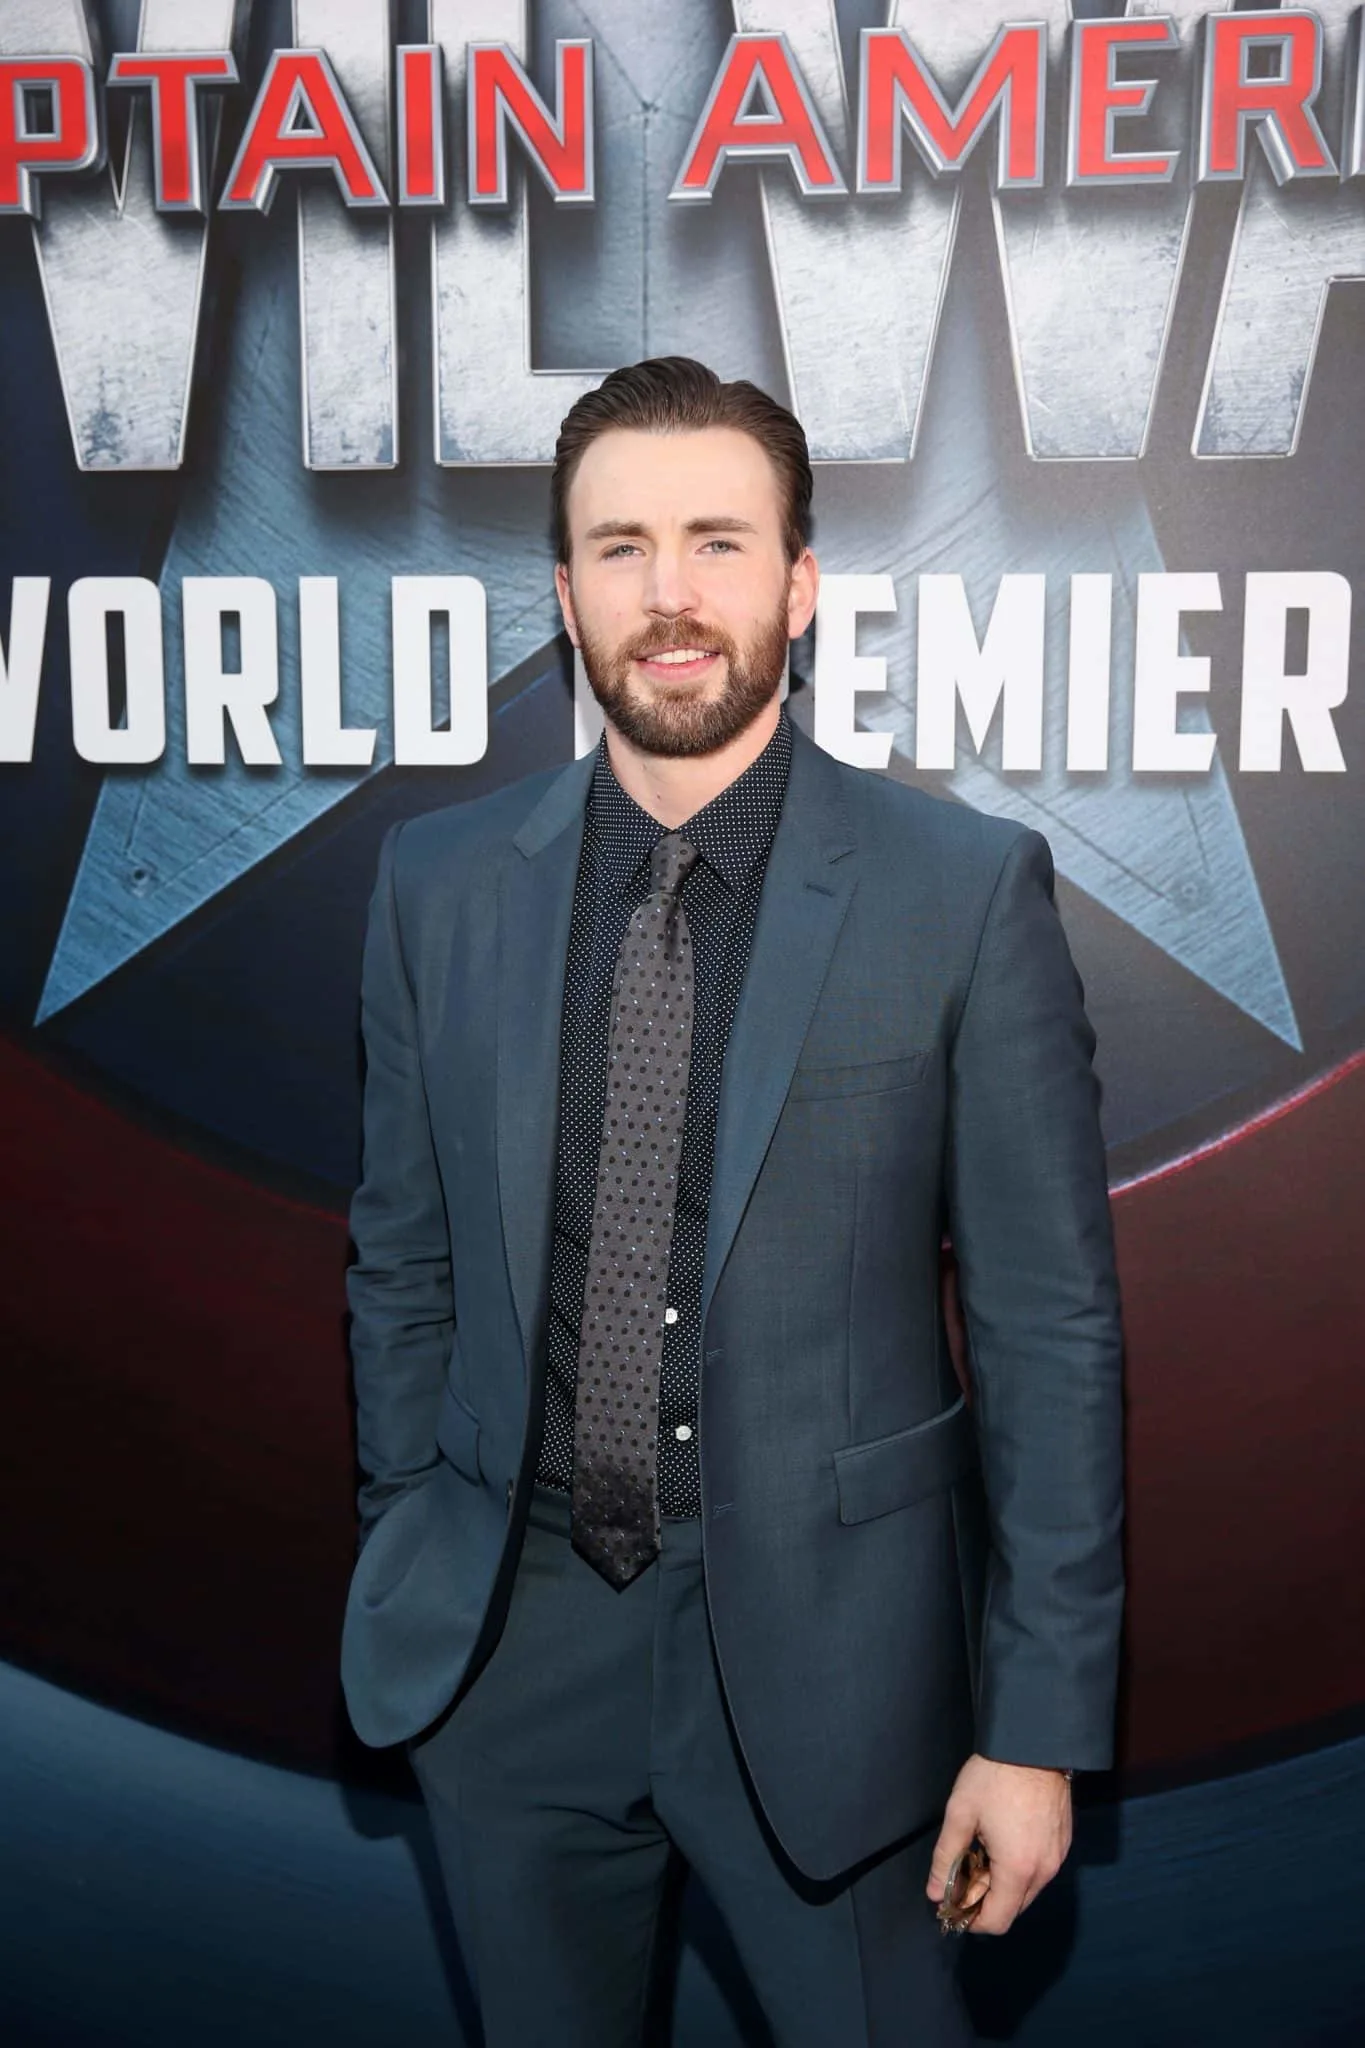 HOLLYWOOD, CALIFORNIA - APRIL 12: Actor Chris Evans attends The World Premiere of Marvel's "Captain America: Civil War" at Dolby Theatre on April 12, 2016 in Los Angeles, California. (Photo by Jesse Grant/Getty Images for Disney) *** Local Caption *** Chris Evans